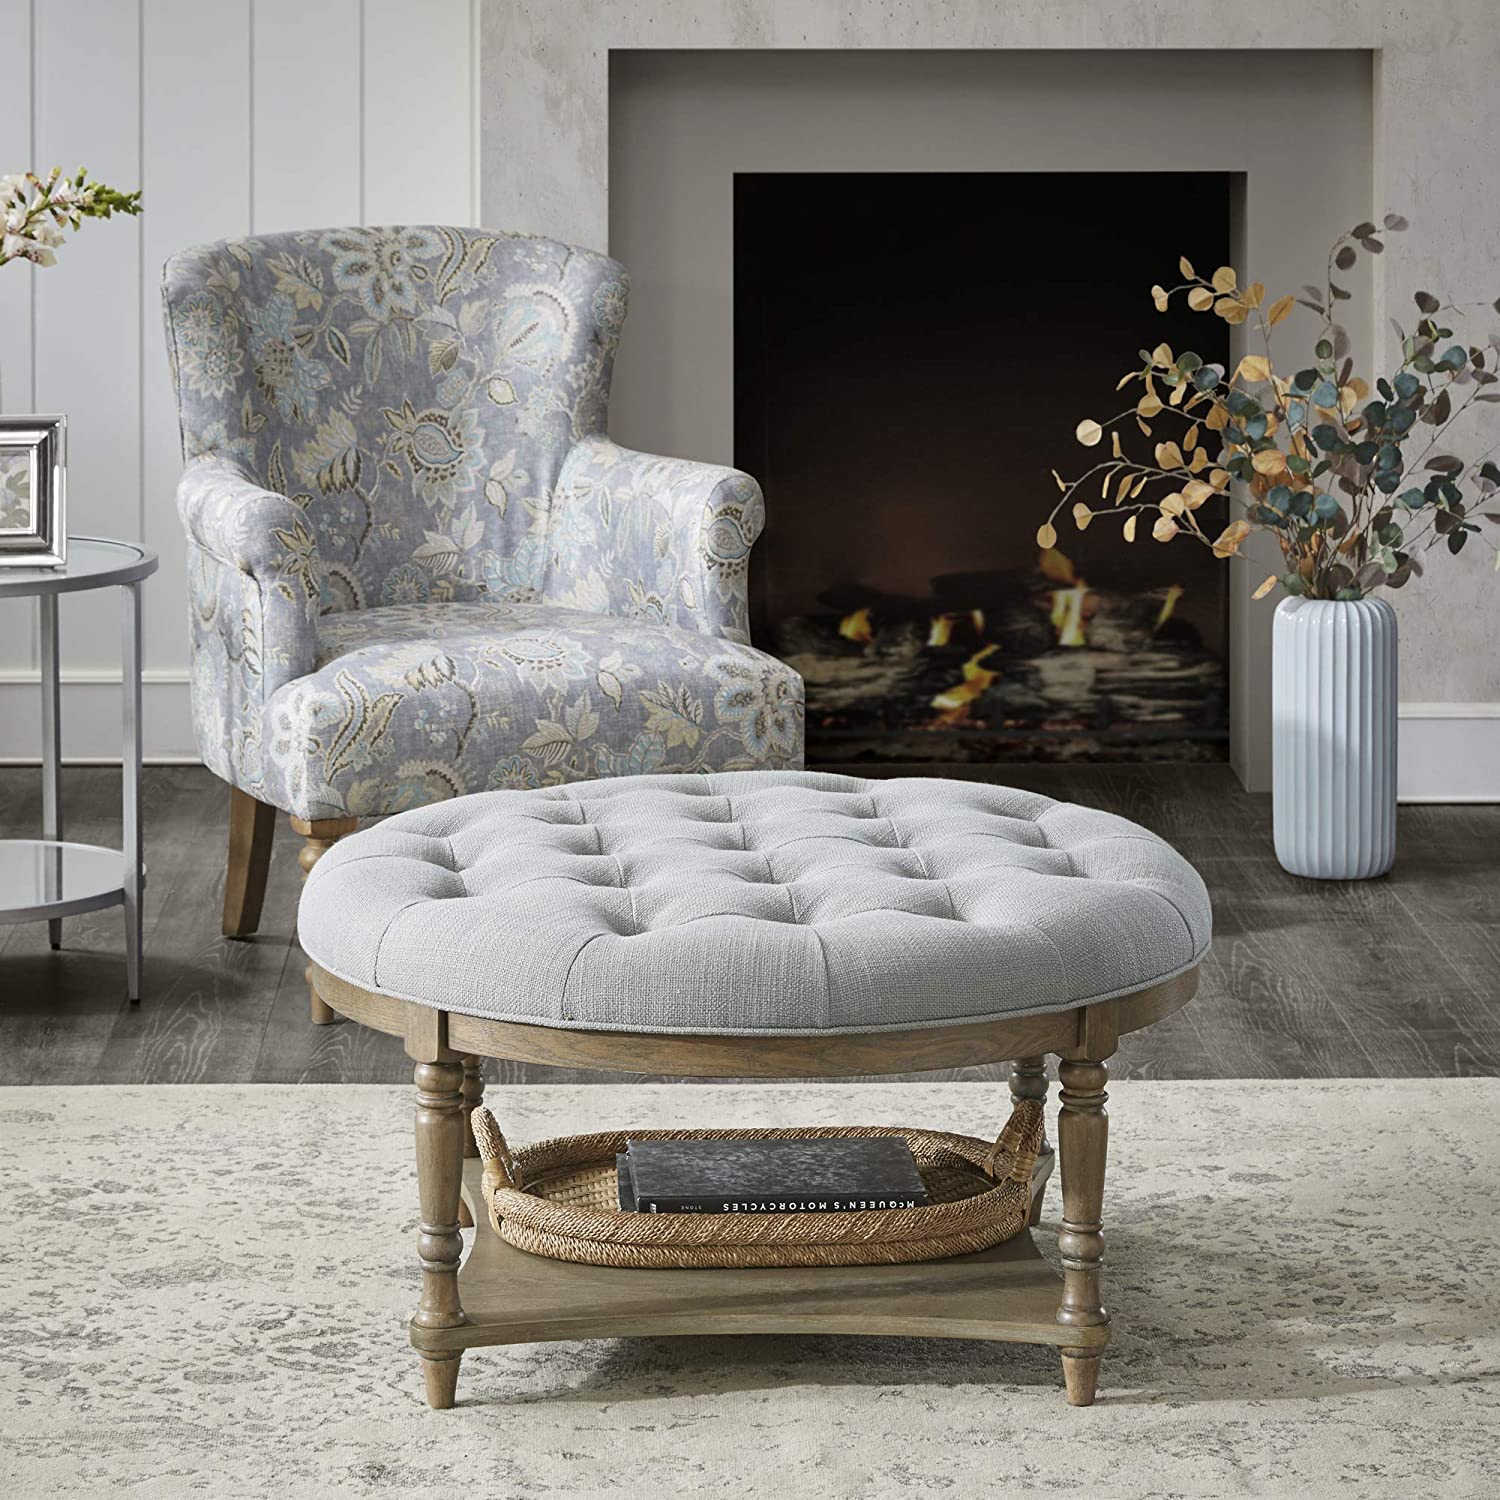 Martha Stewart Cedric Round Coffee Table - Solid Wood Legs,Button Tufted Top Cocktail Ottoman with Lower Shelf,Modern Contemporary Style Accent Footstool Living Room Furniture,36"Diameter x 19"H, Grey